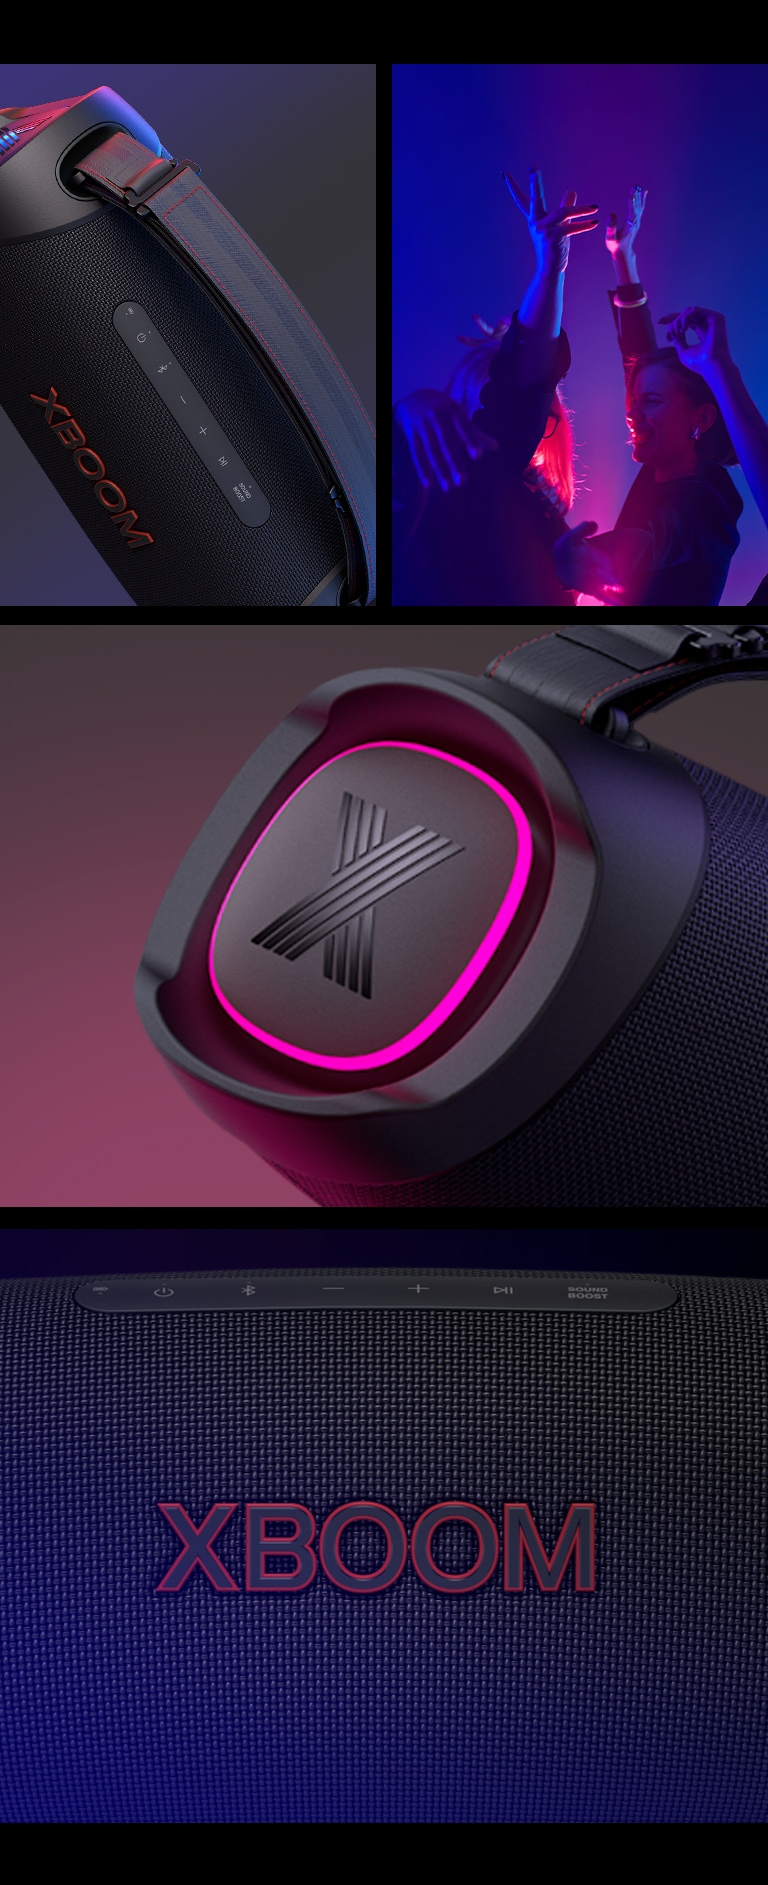 College. From left, close up view of LG XBOOM Go XG8T. Next, an image of people enjoying the music. On the right from top to bottom: close-up view of the speaker with pink lighting and XBOOM logo.